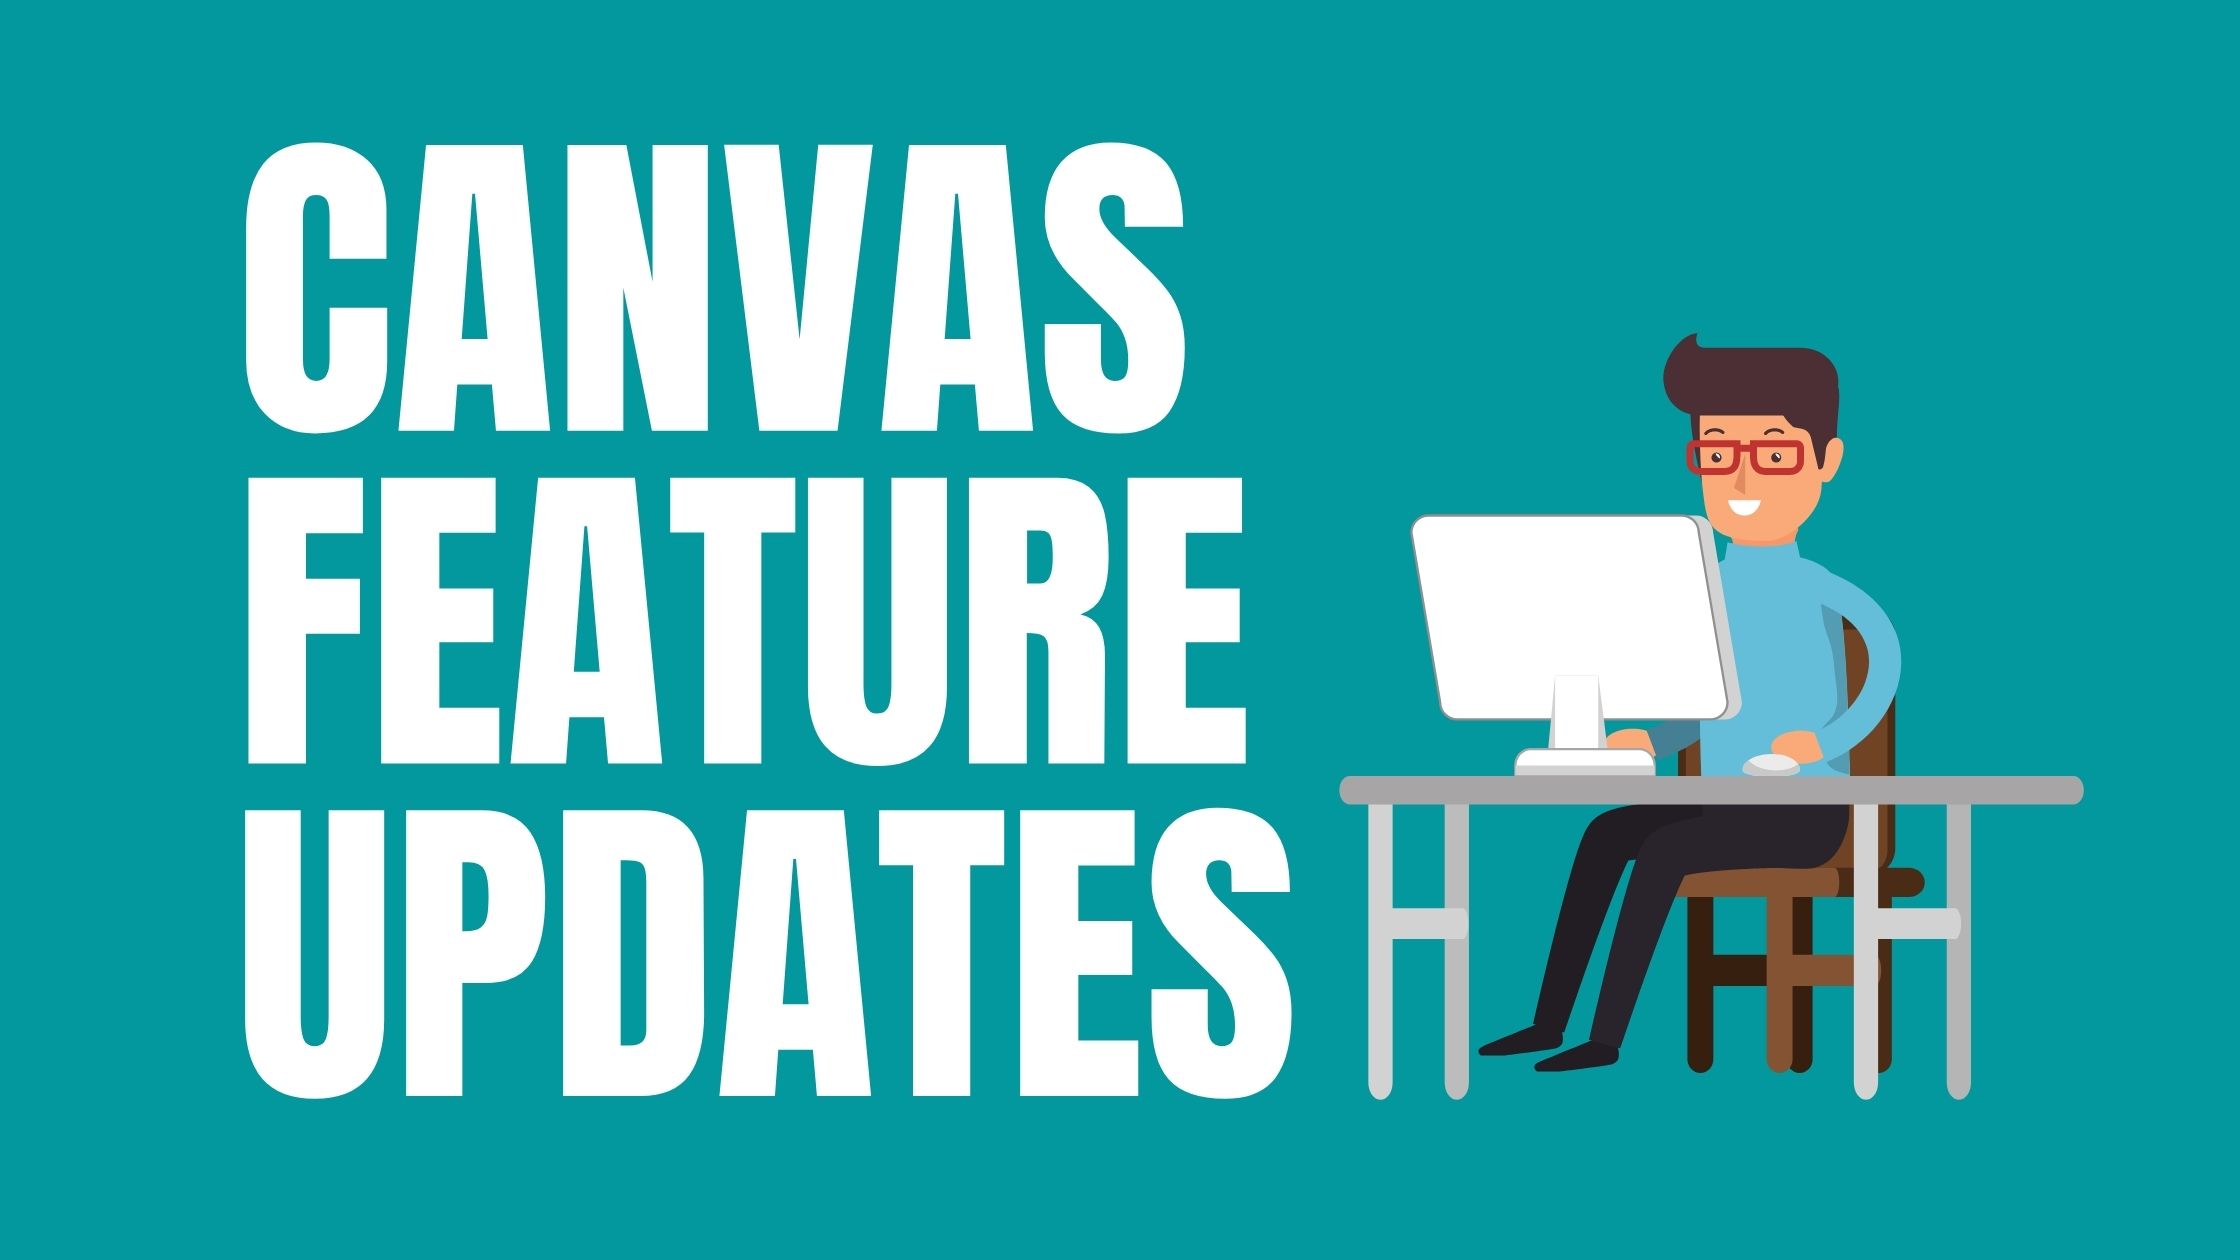 Upcoming Changes to Canvas